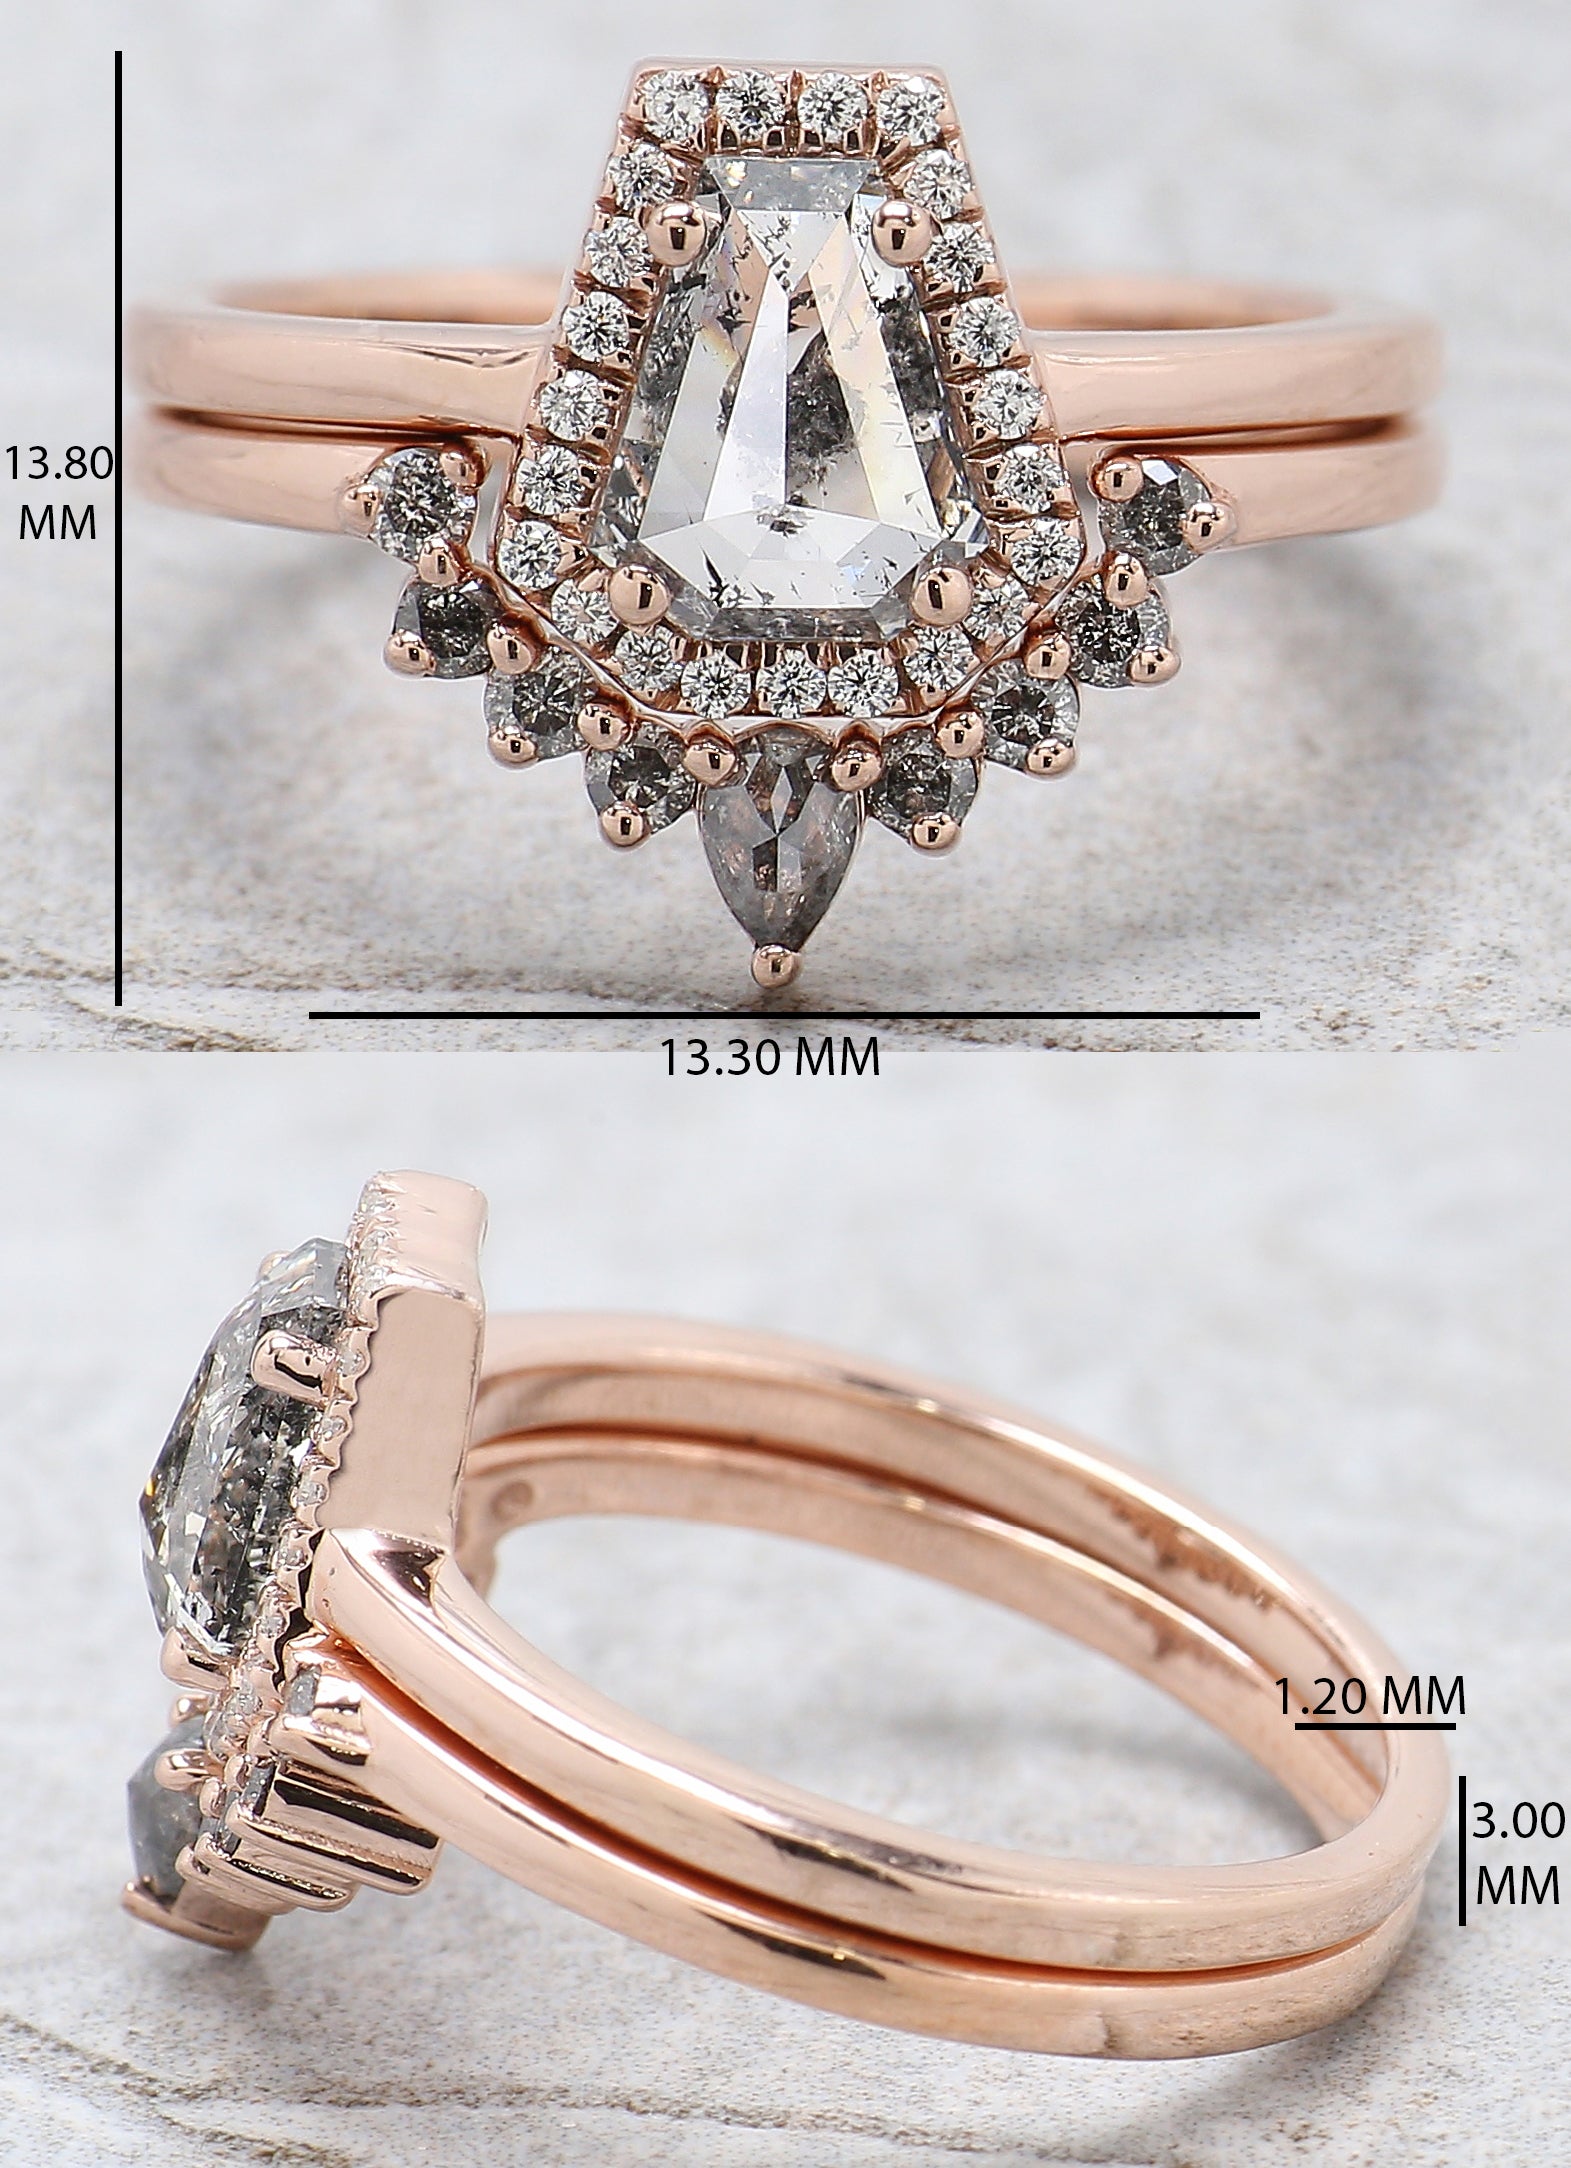 Coffin Cut Salt And Pepper Diamond Ring 0.93 Ct 6.99 MM Coffin Diamond Ring 14K Solid Rose Gold Silver Engagement Ring Gift For Her QL2608